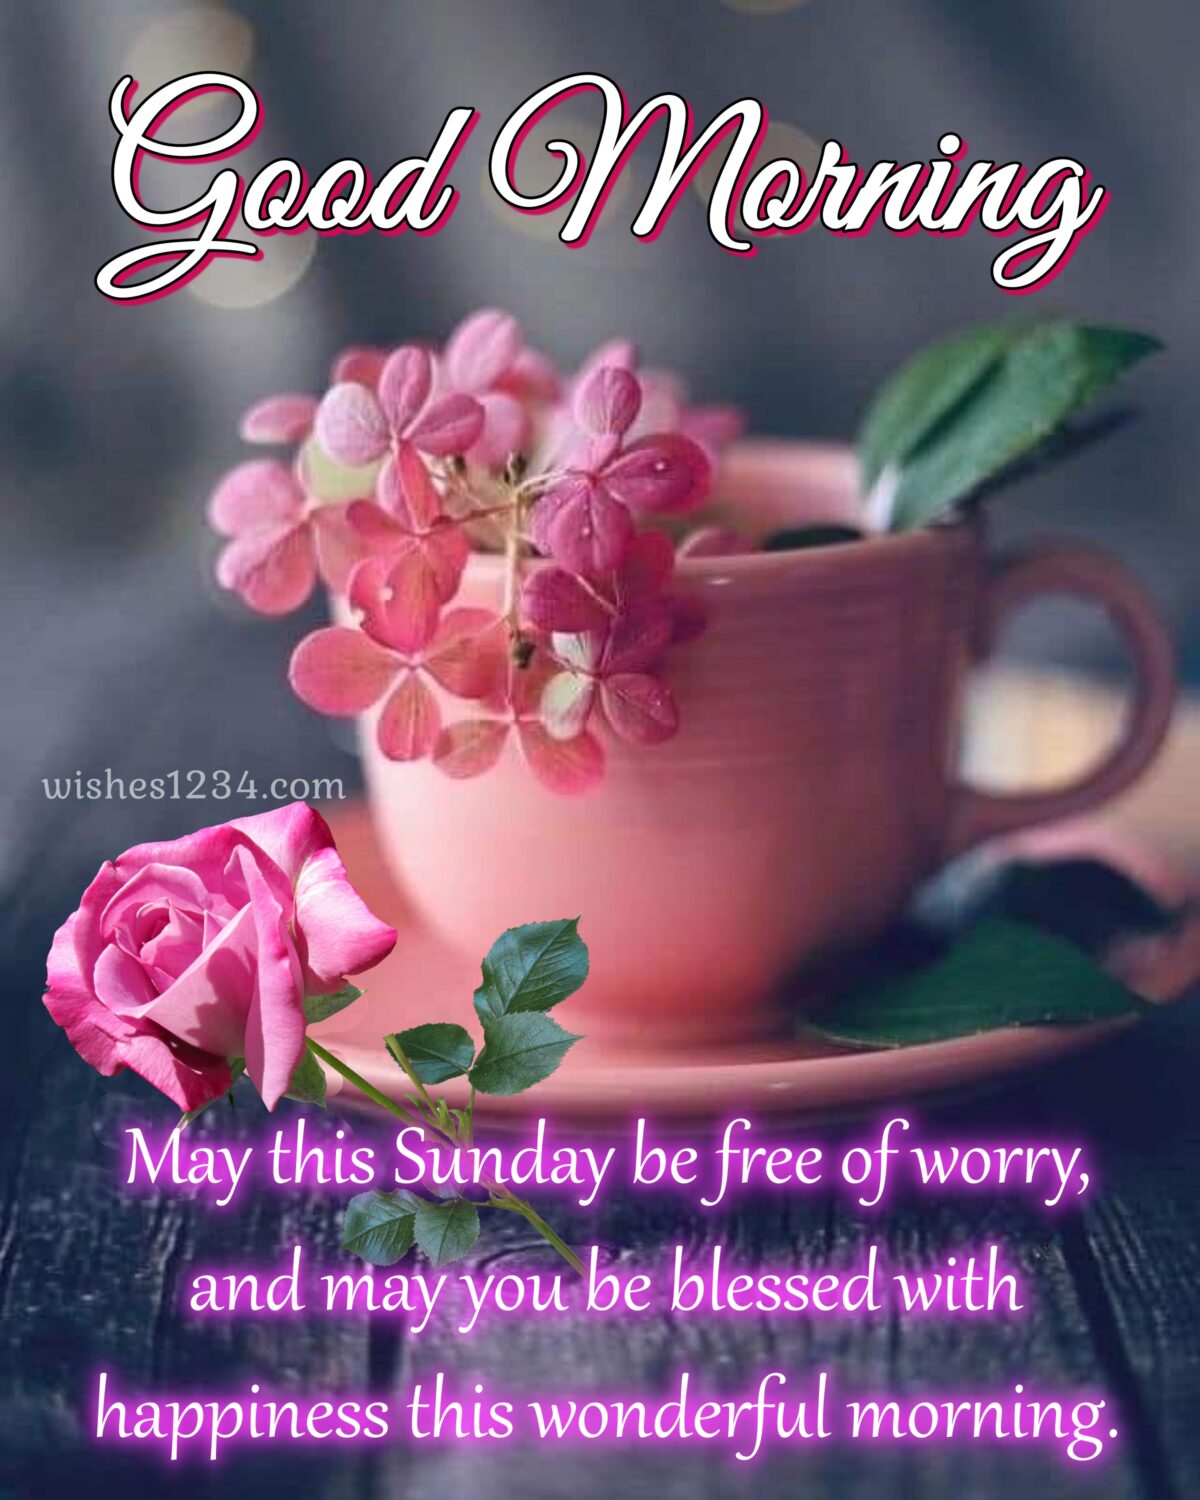 clay cup with flowers, Happy Sunday Blessings Quotes Images Pictures wishes.